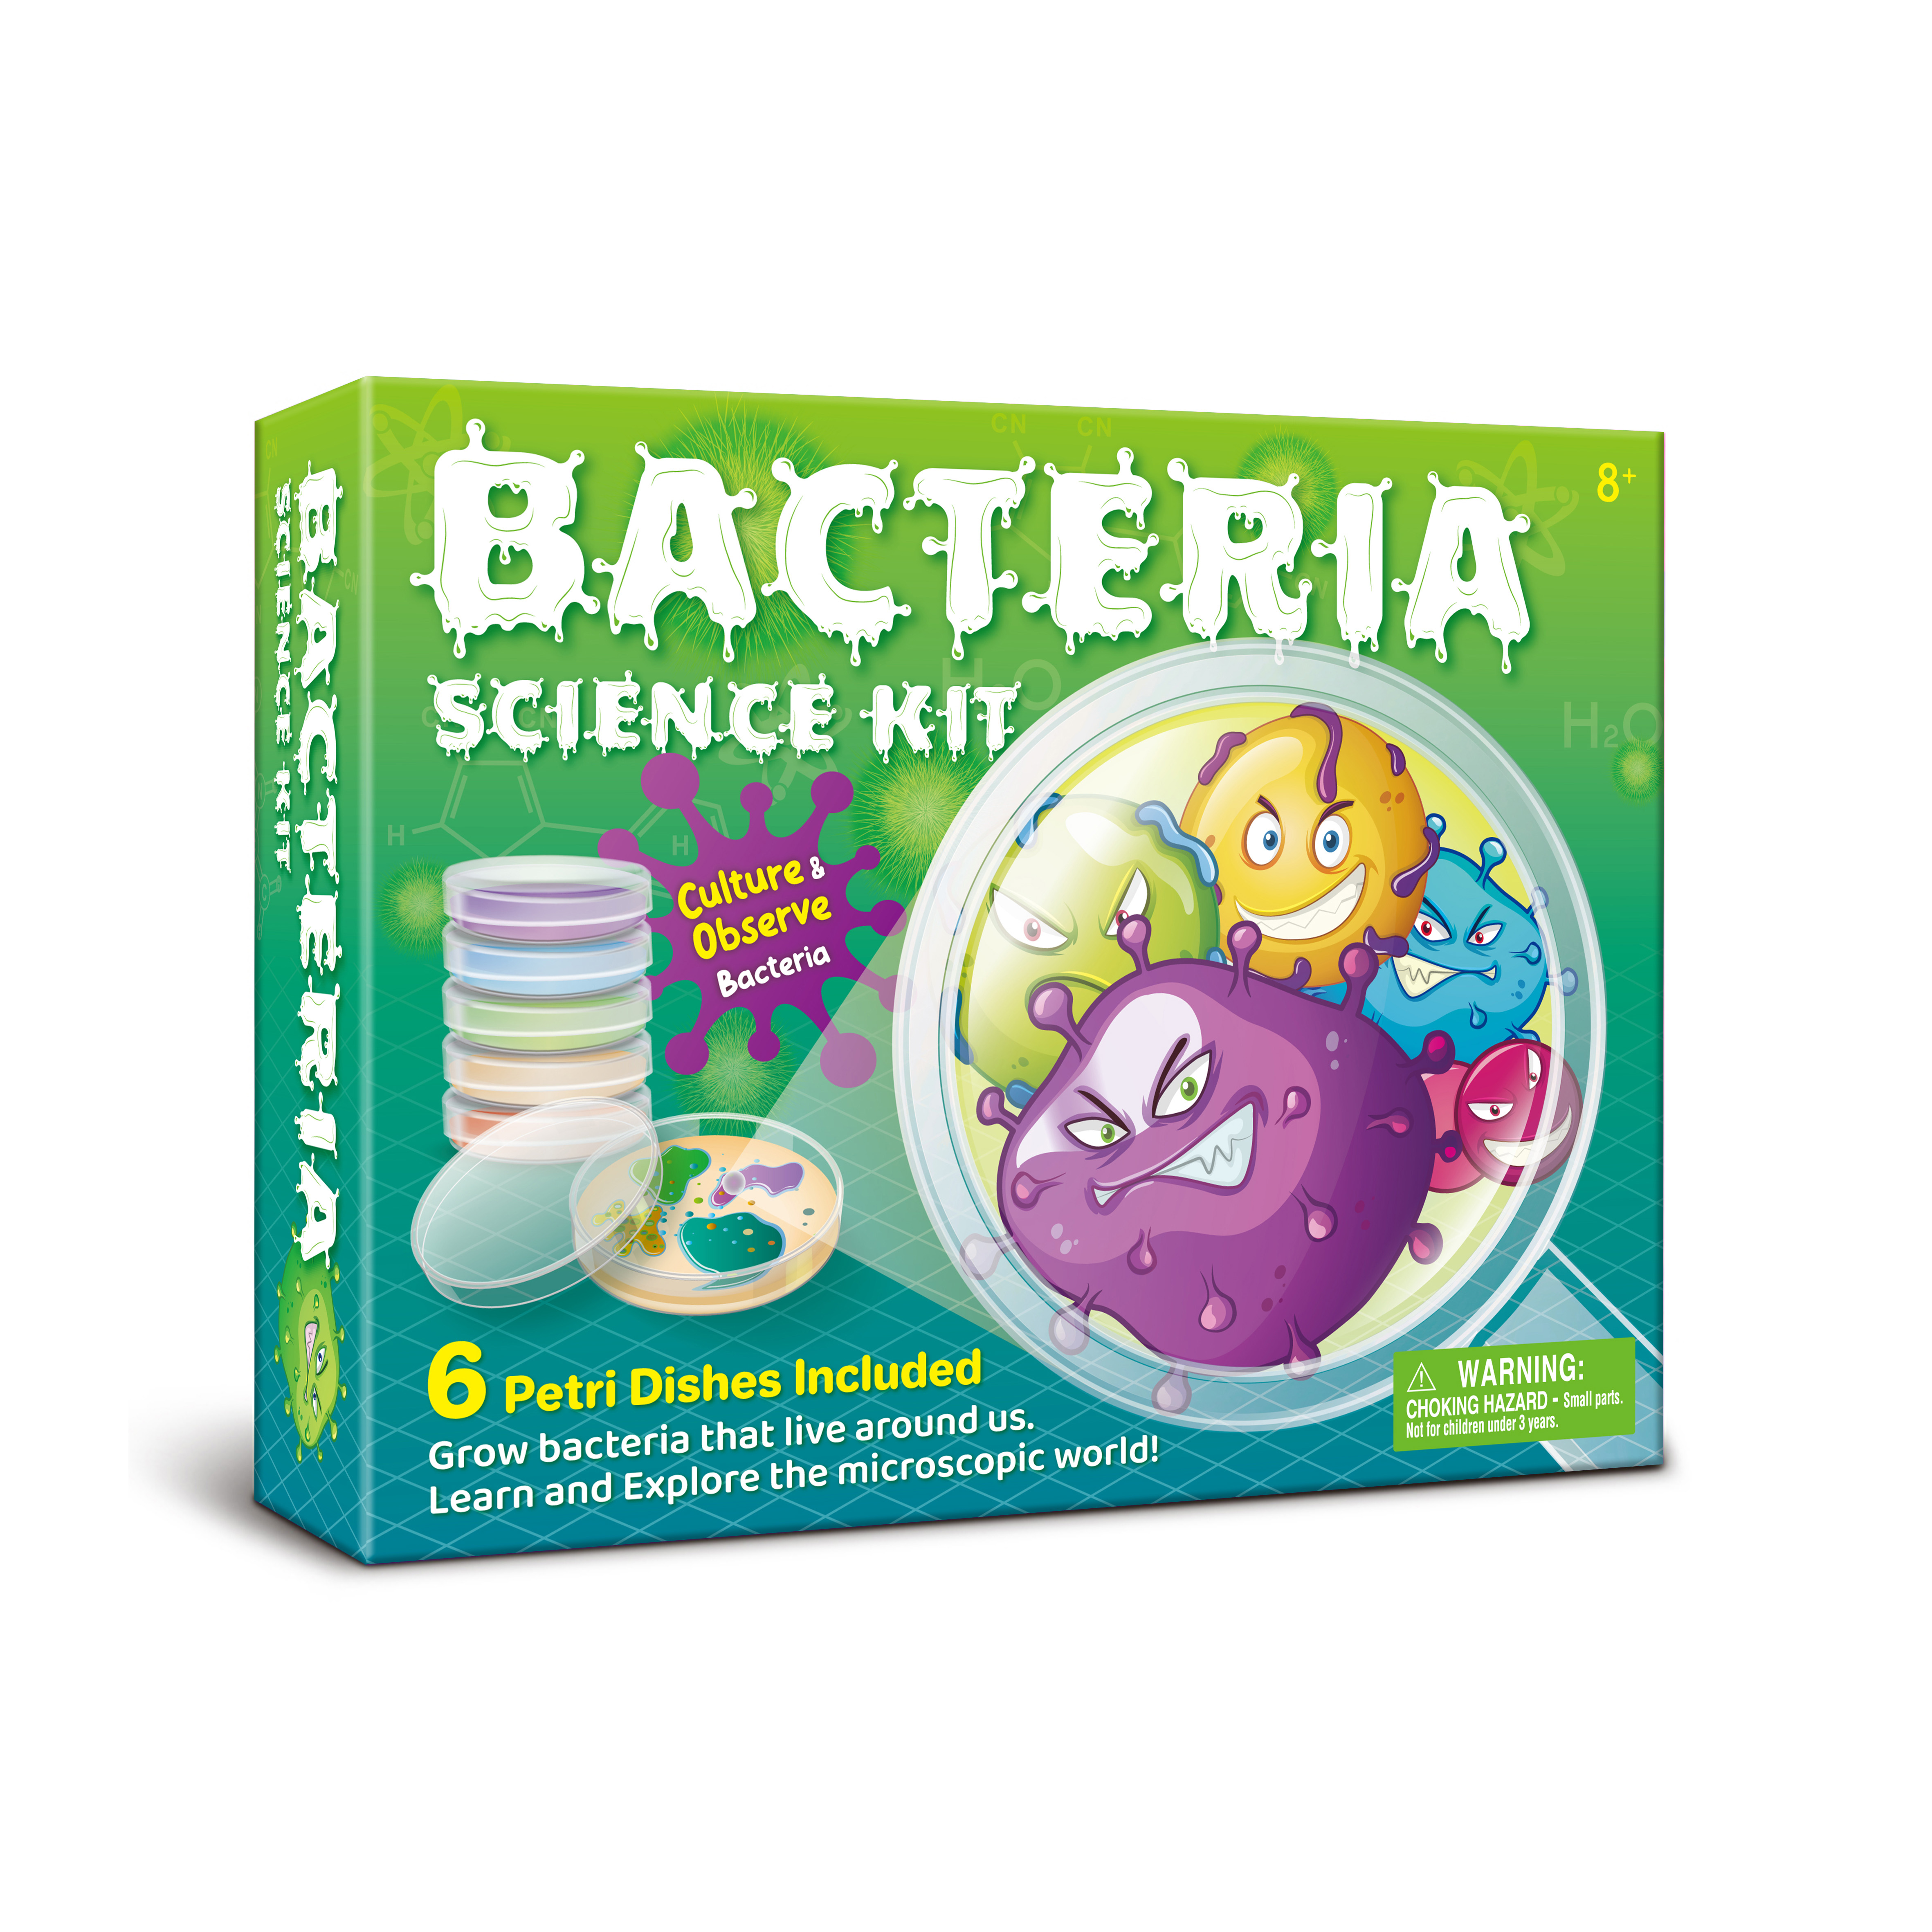 NICE=amazing kids educational toy slearn and explore microscopic world 6 ri dishes included grow bacteria toy bacteria science kit